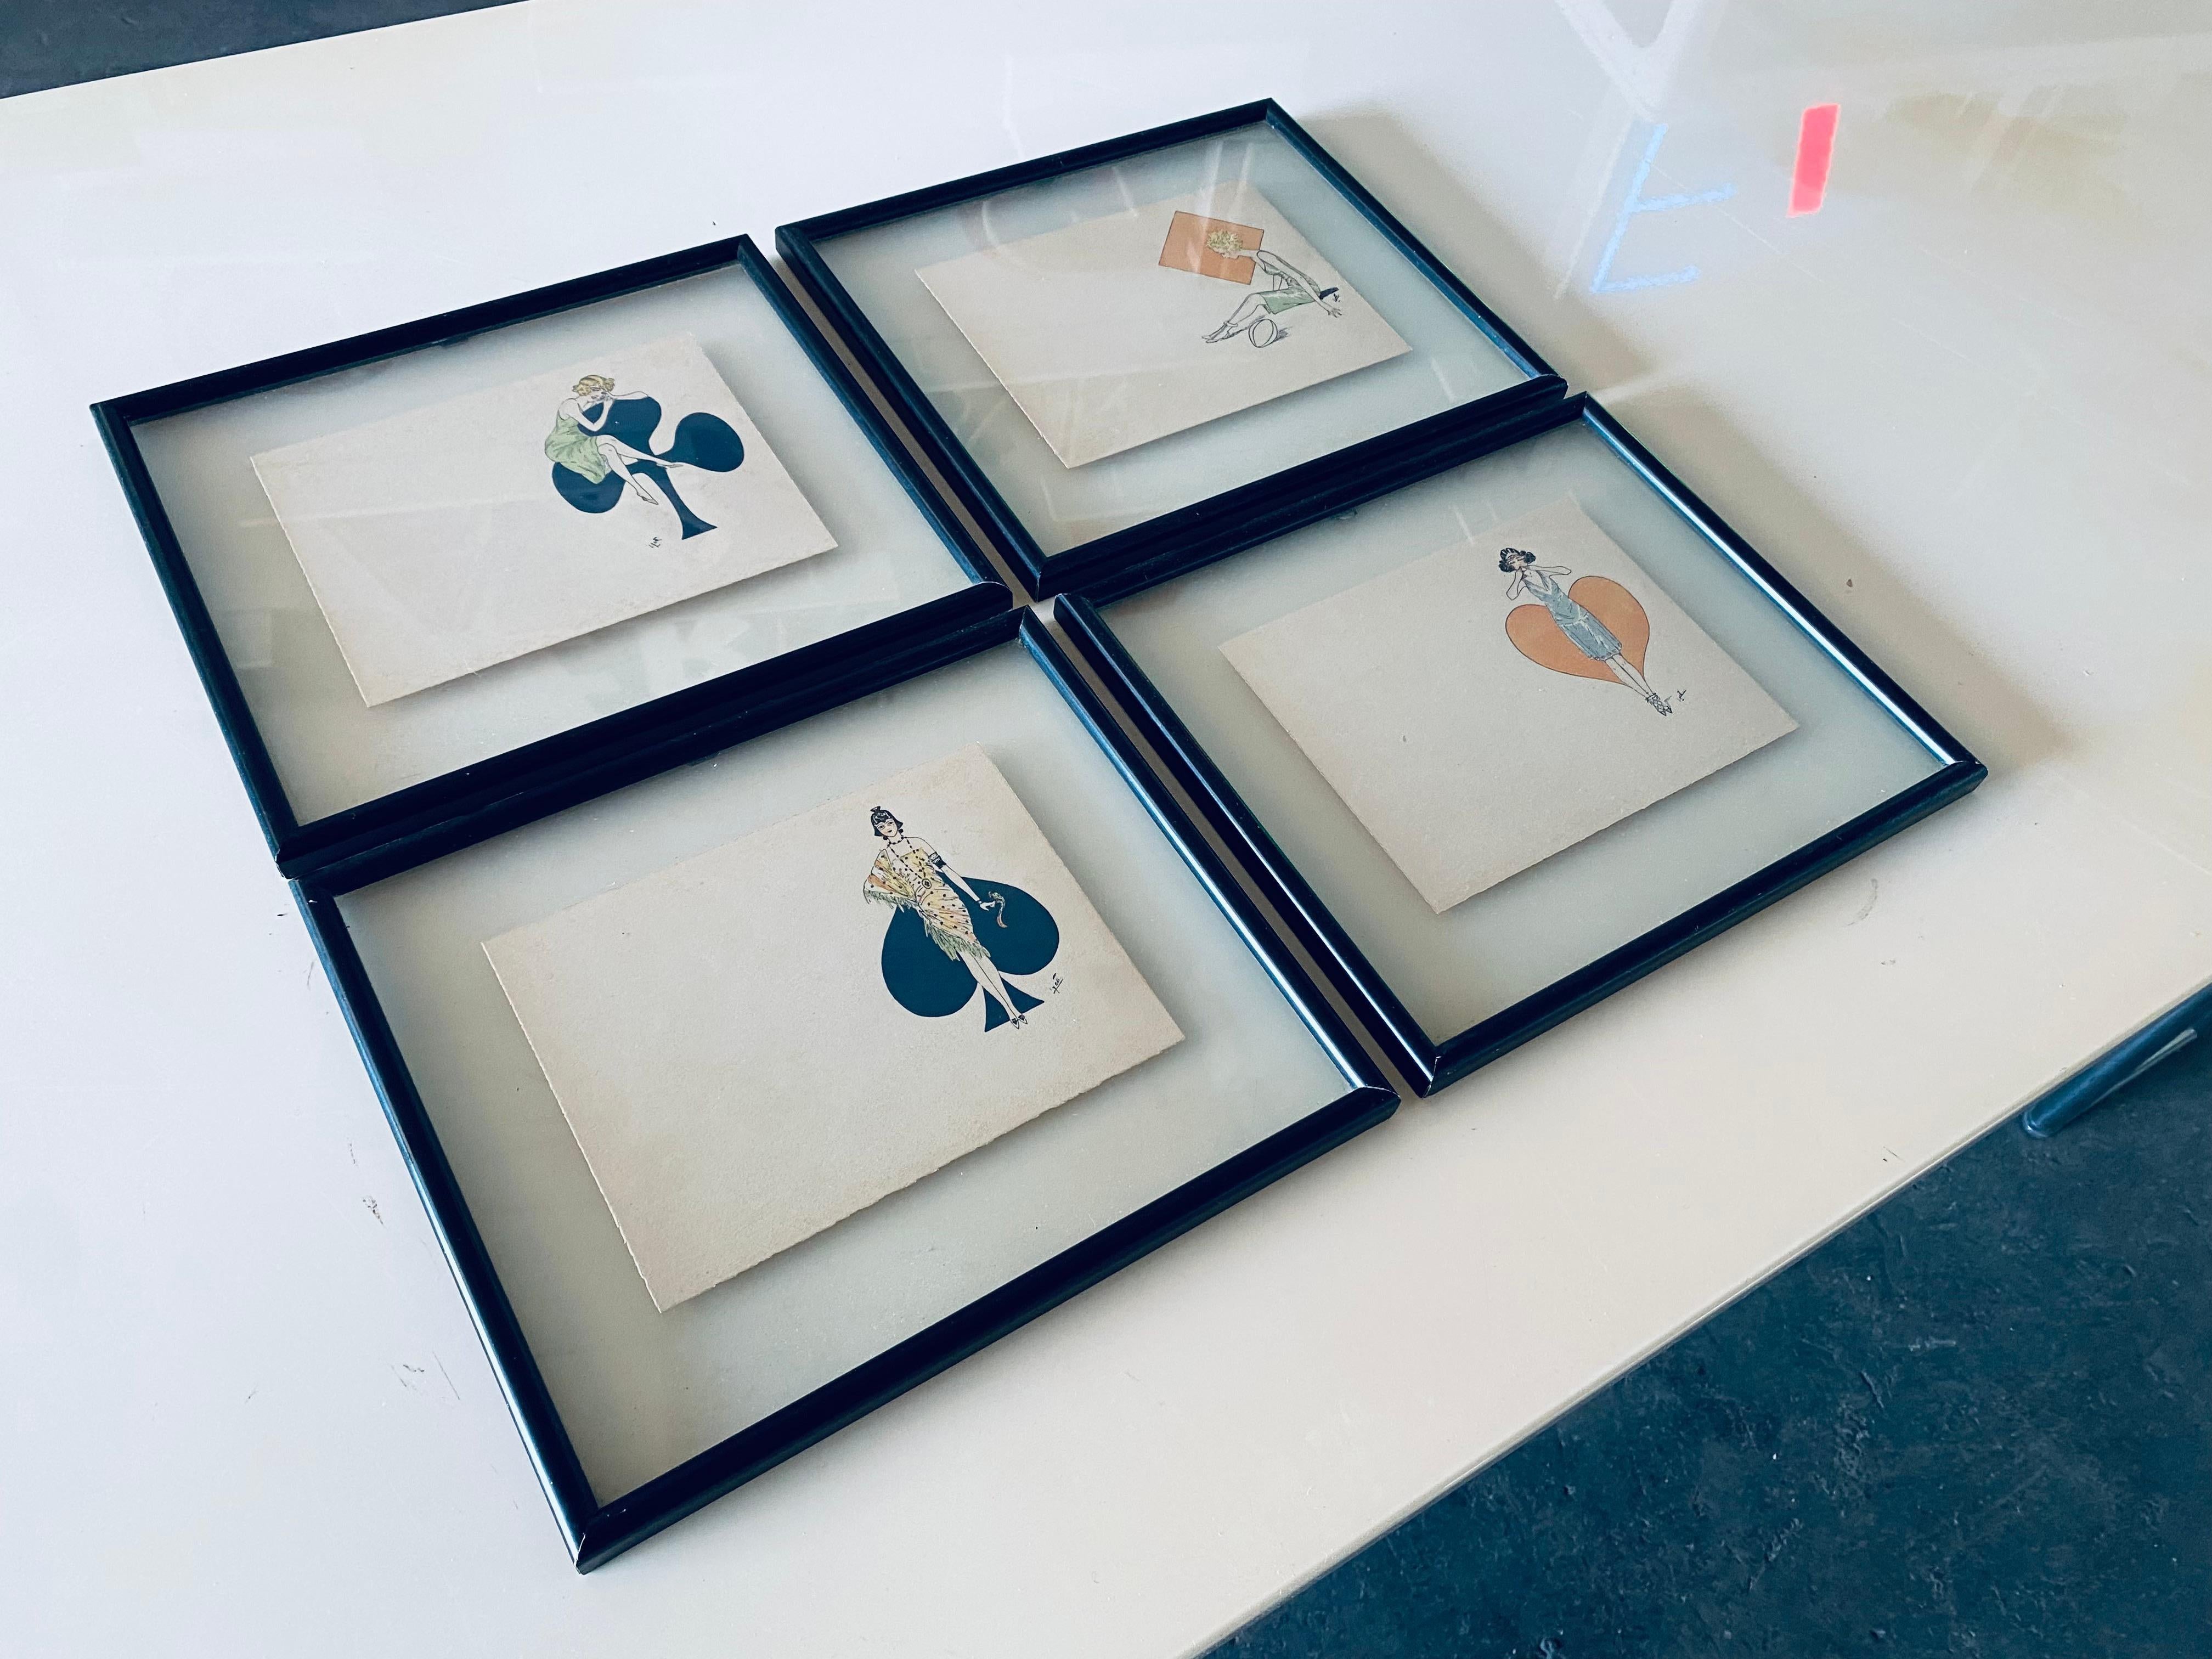 These 4 framed lithographs show Art Deco ladies in front of playing card motifs. They are each signed at the bottom right.
Since the motifs are located on the right side of the picture, one can assume that they are former greeting cards. On the left